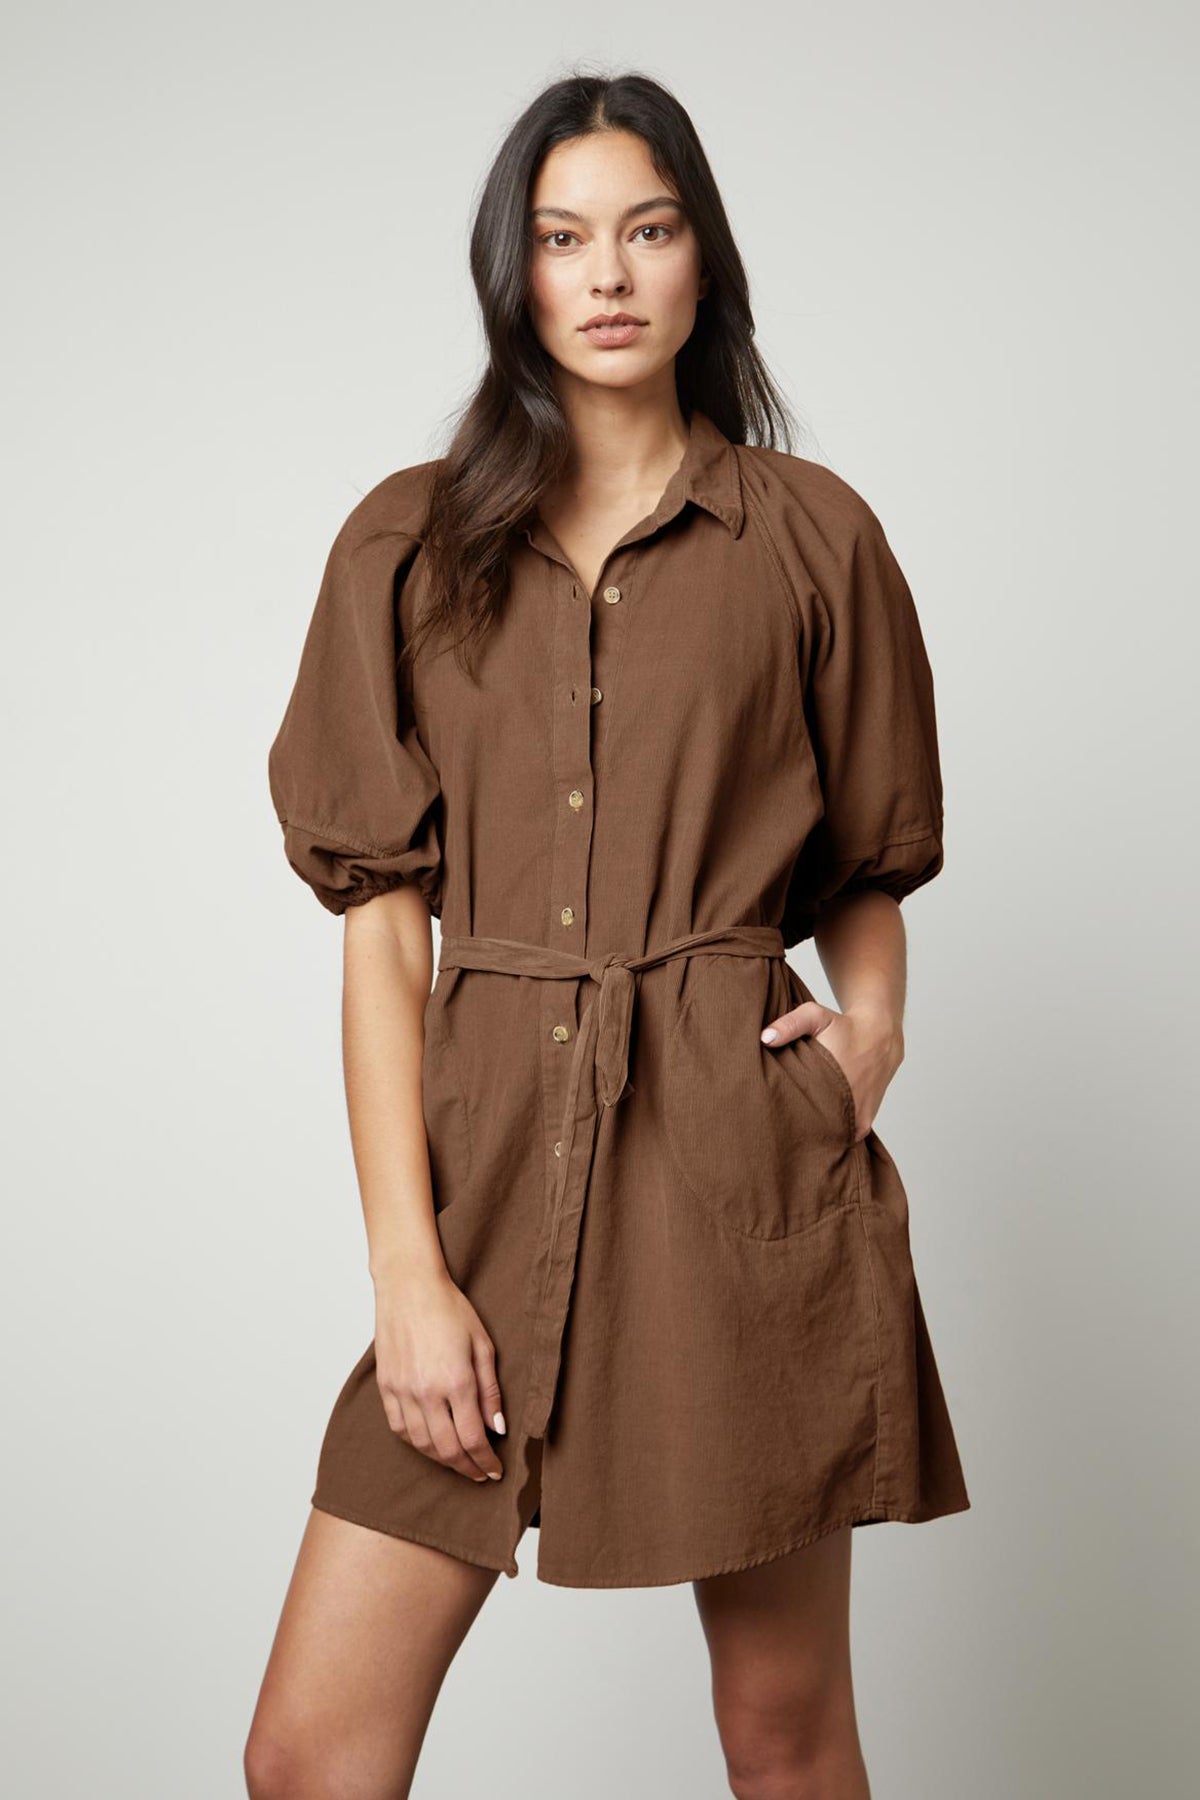 The model is wearing a KADY CORDUROY BUTTON-UP DRESS by Velvet by Graham & Spencer.-26727742210241